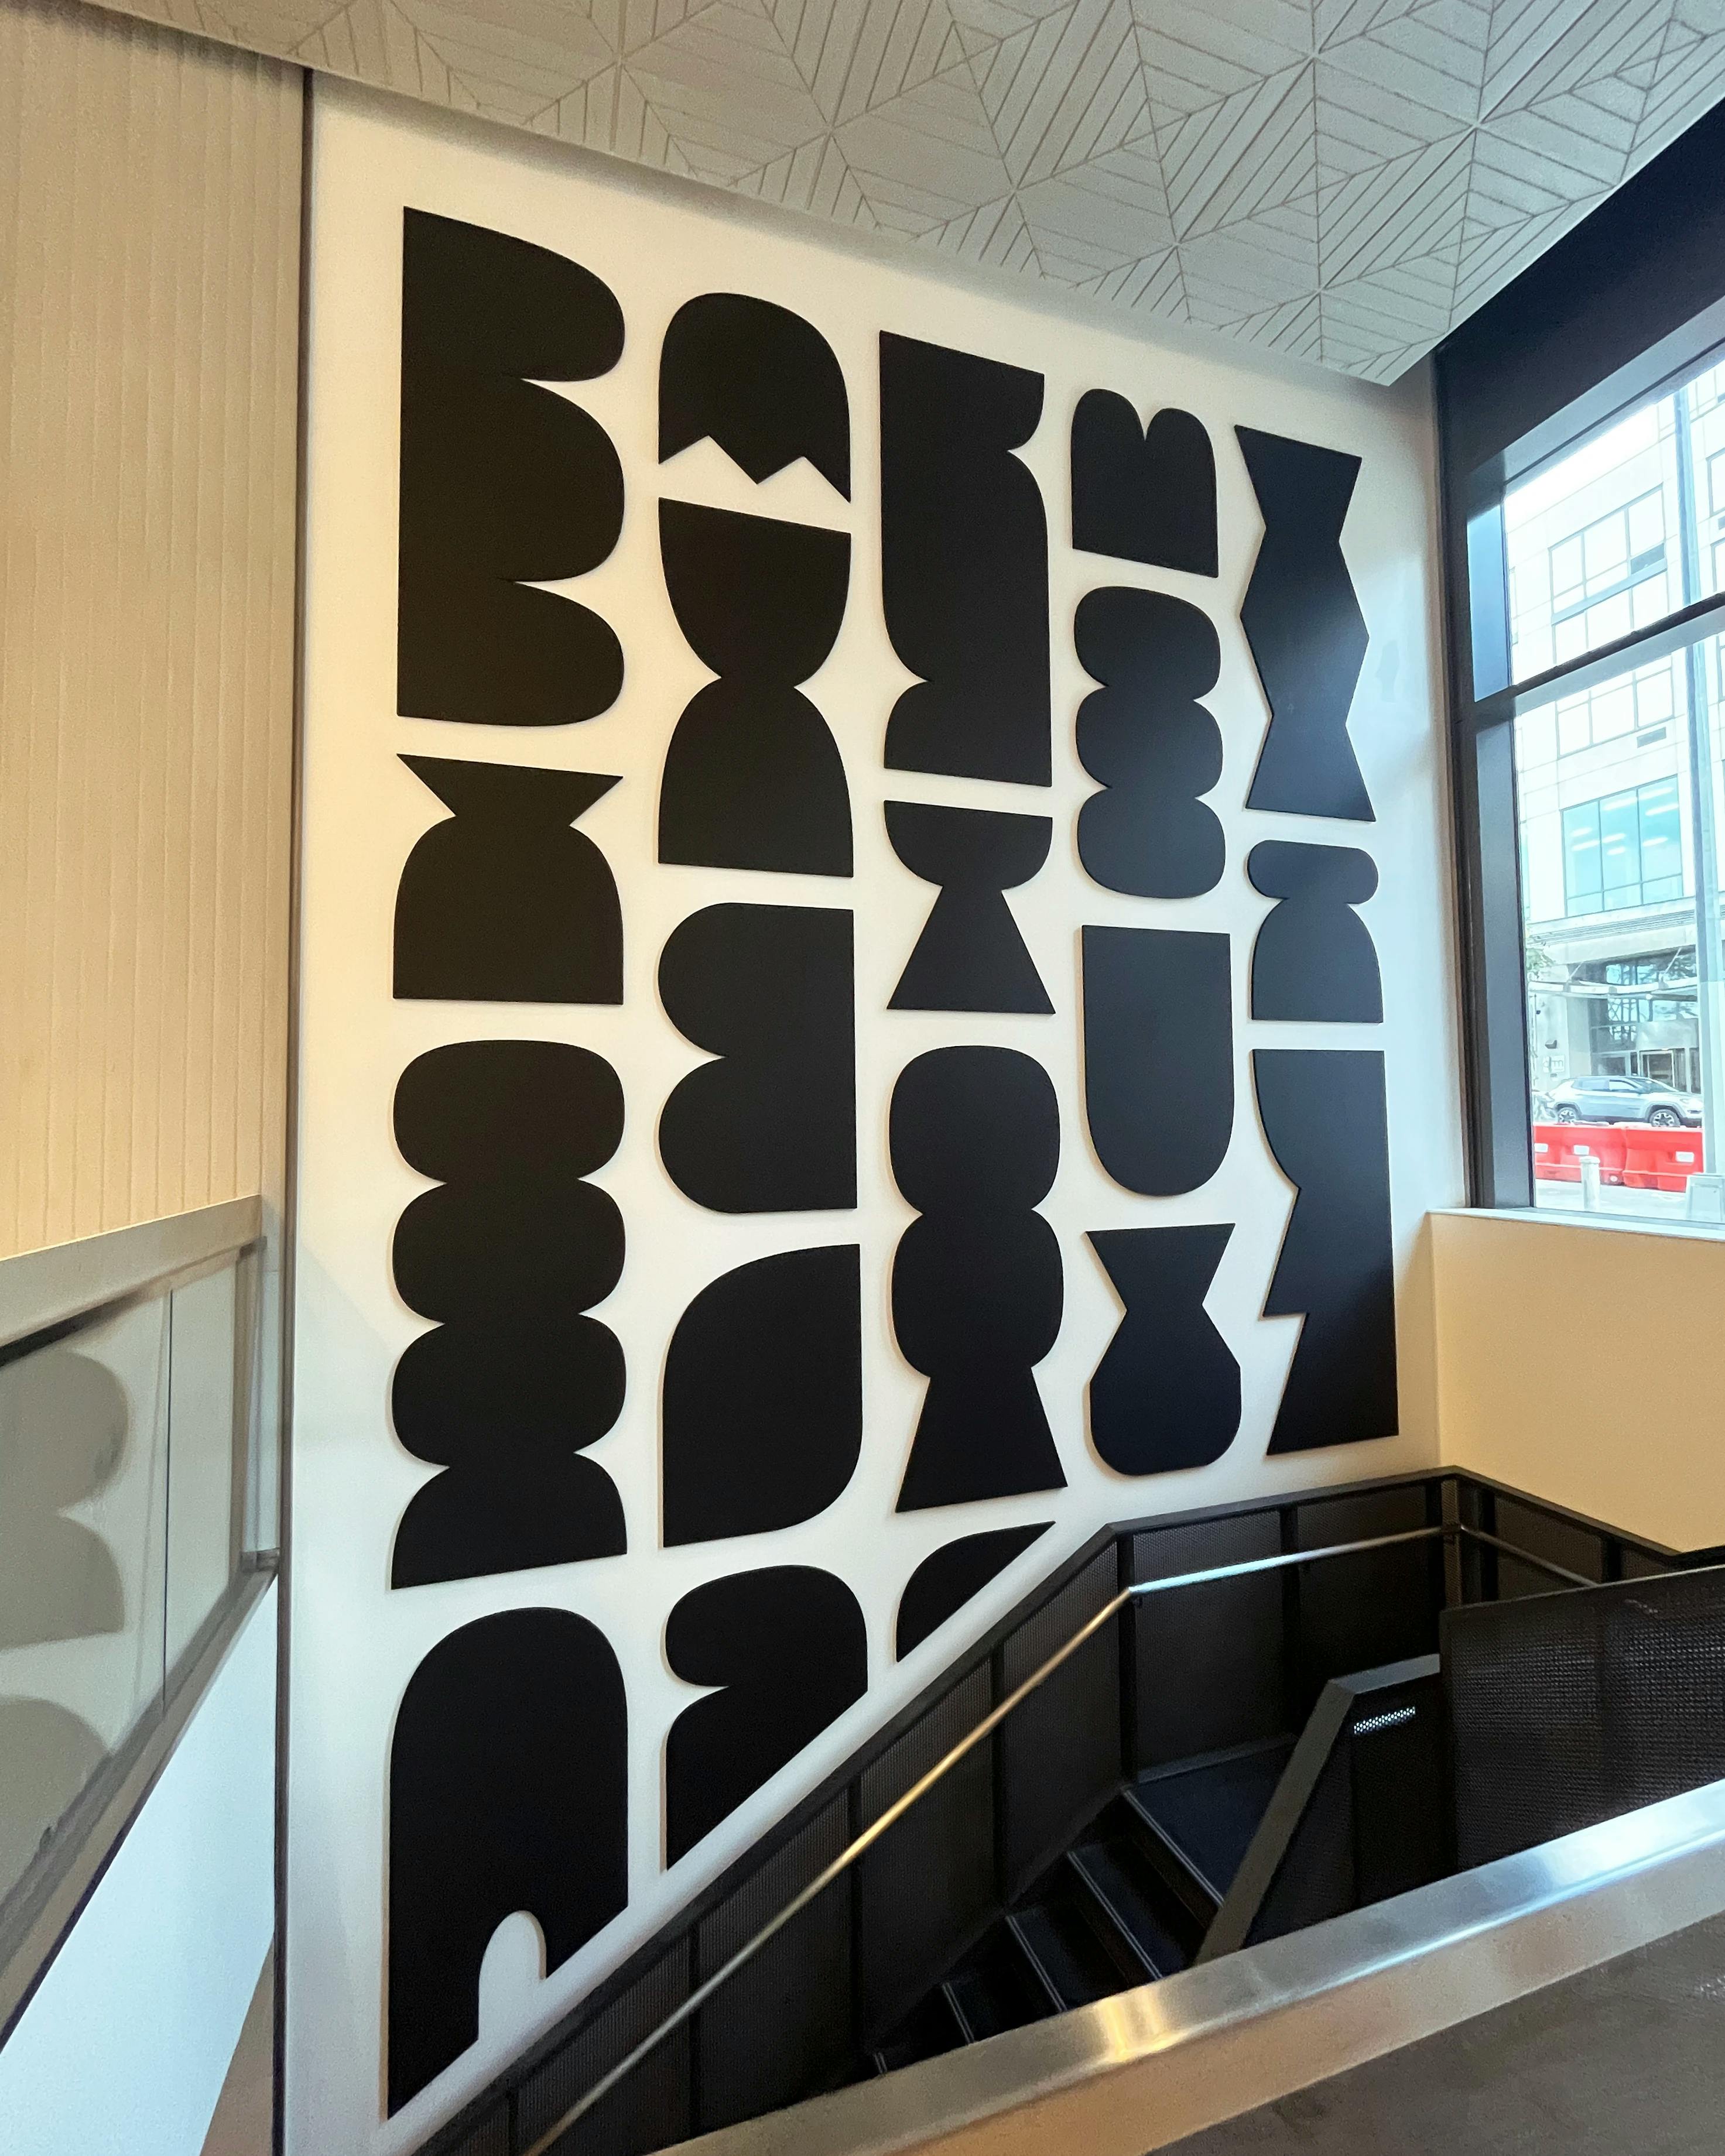 A custom floor-to-ceiling mural of black geometric shapes on a white wall by artist Dan Covert in the stairwell of a modern residential building.